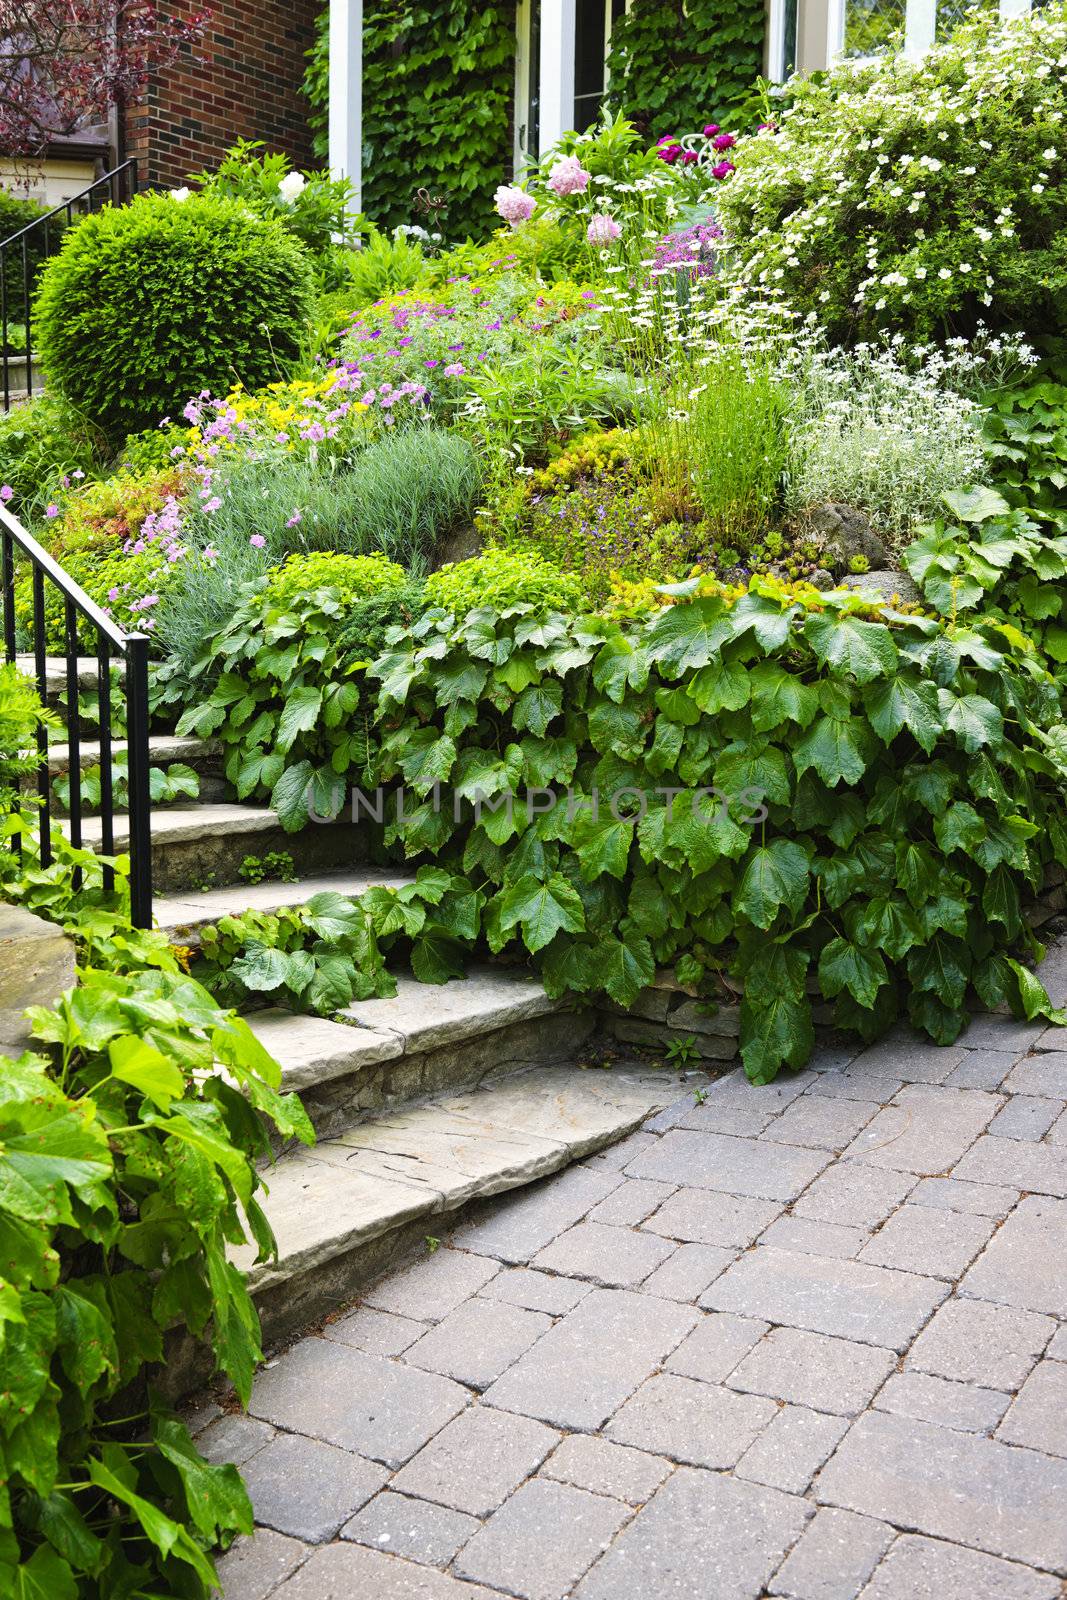 Landscaped garden path with natural stone steps and metal railing